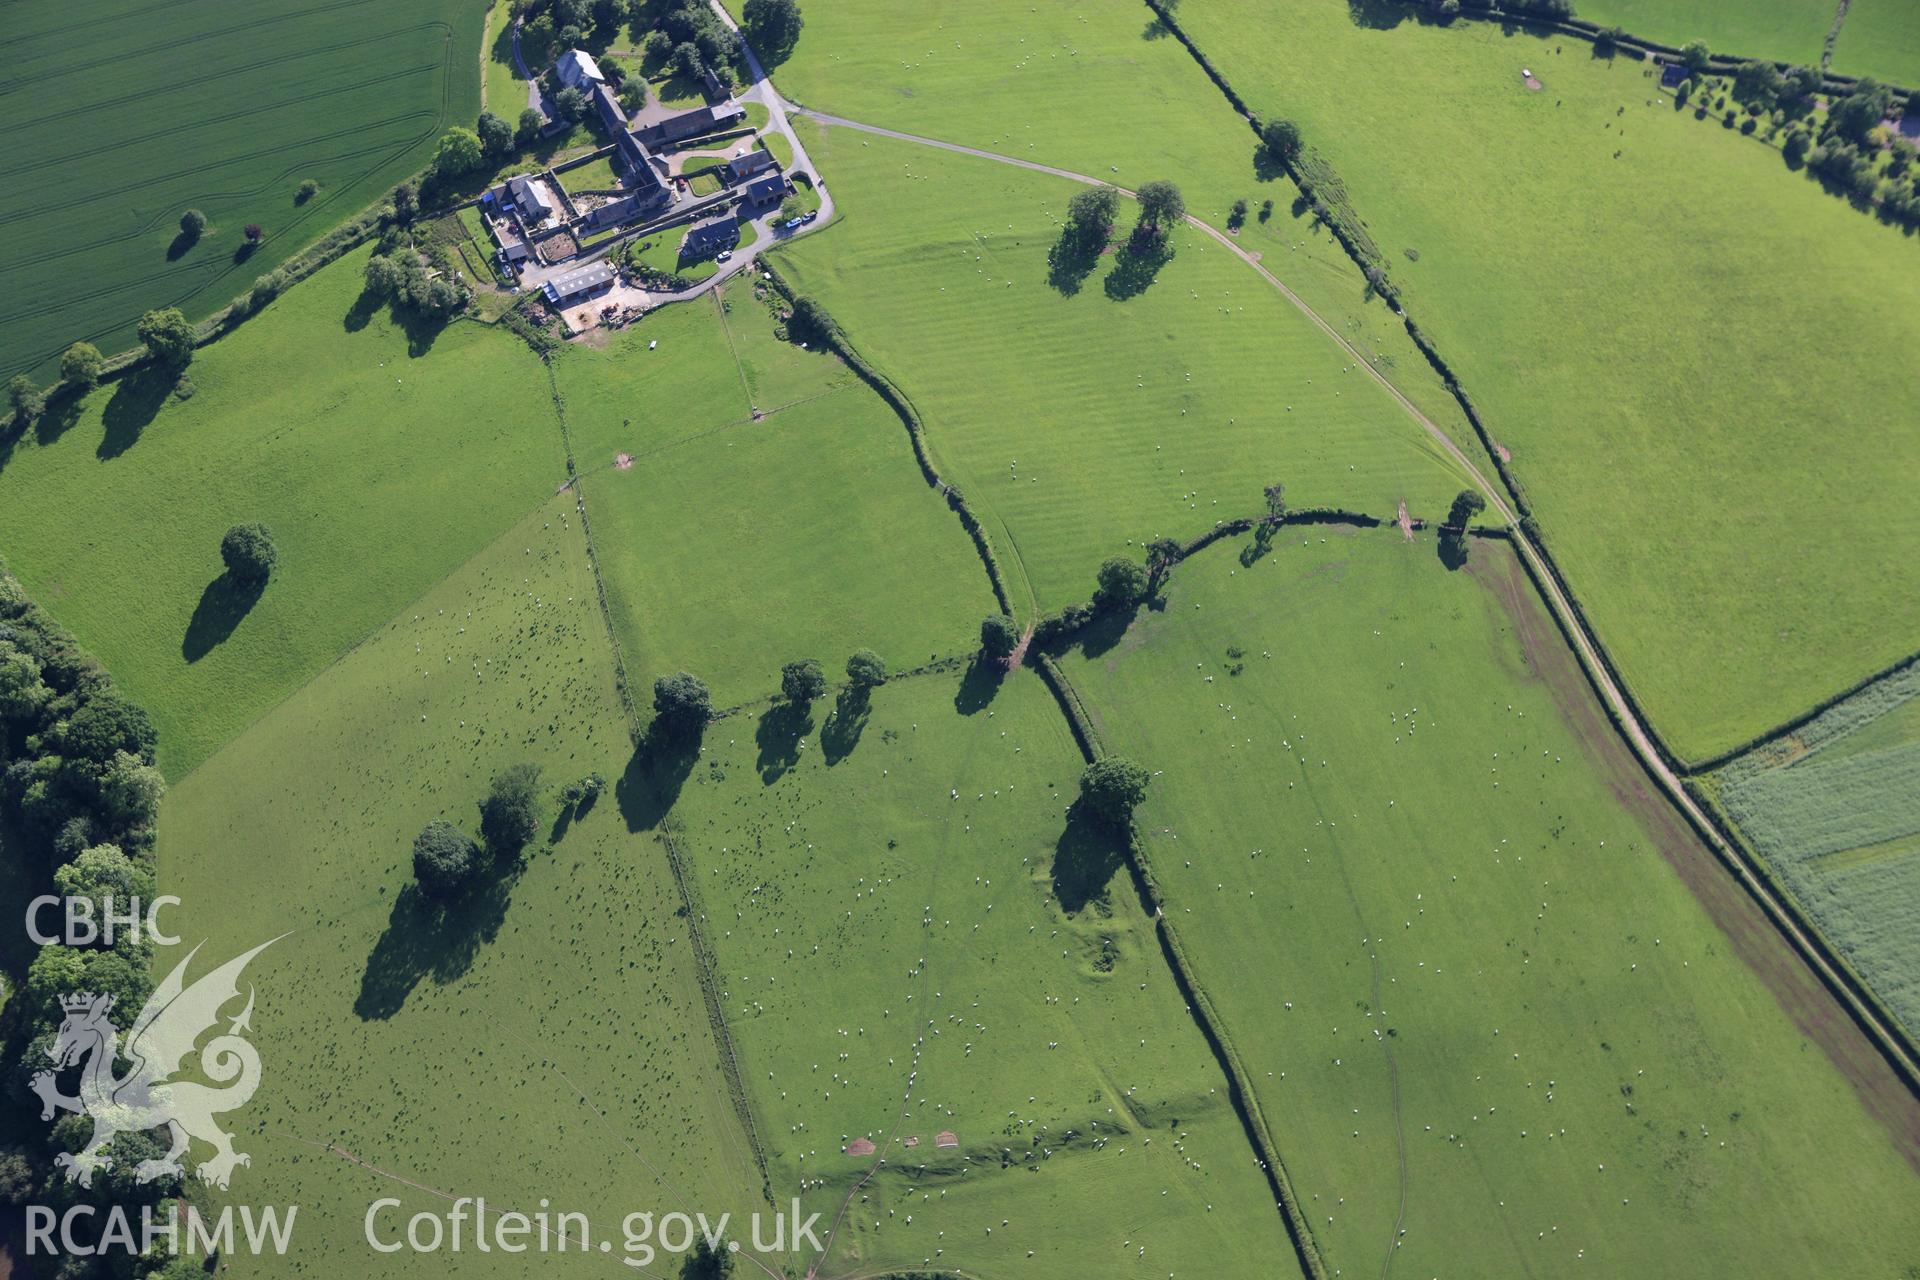 RCAHMW colour oblique aerial photograph of Clyro Roman Fort. Taken on 11 June 2009 by Toby Driver